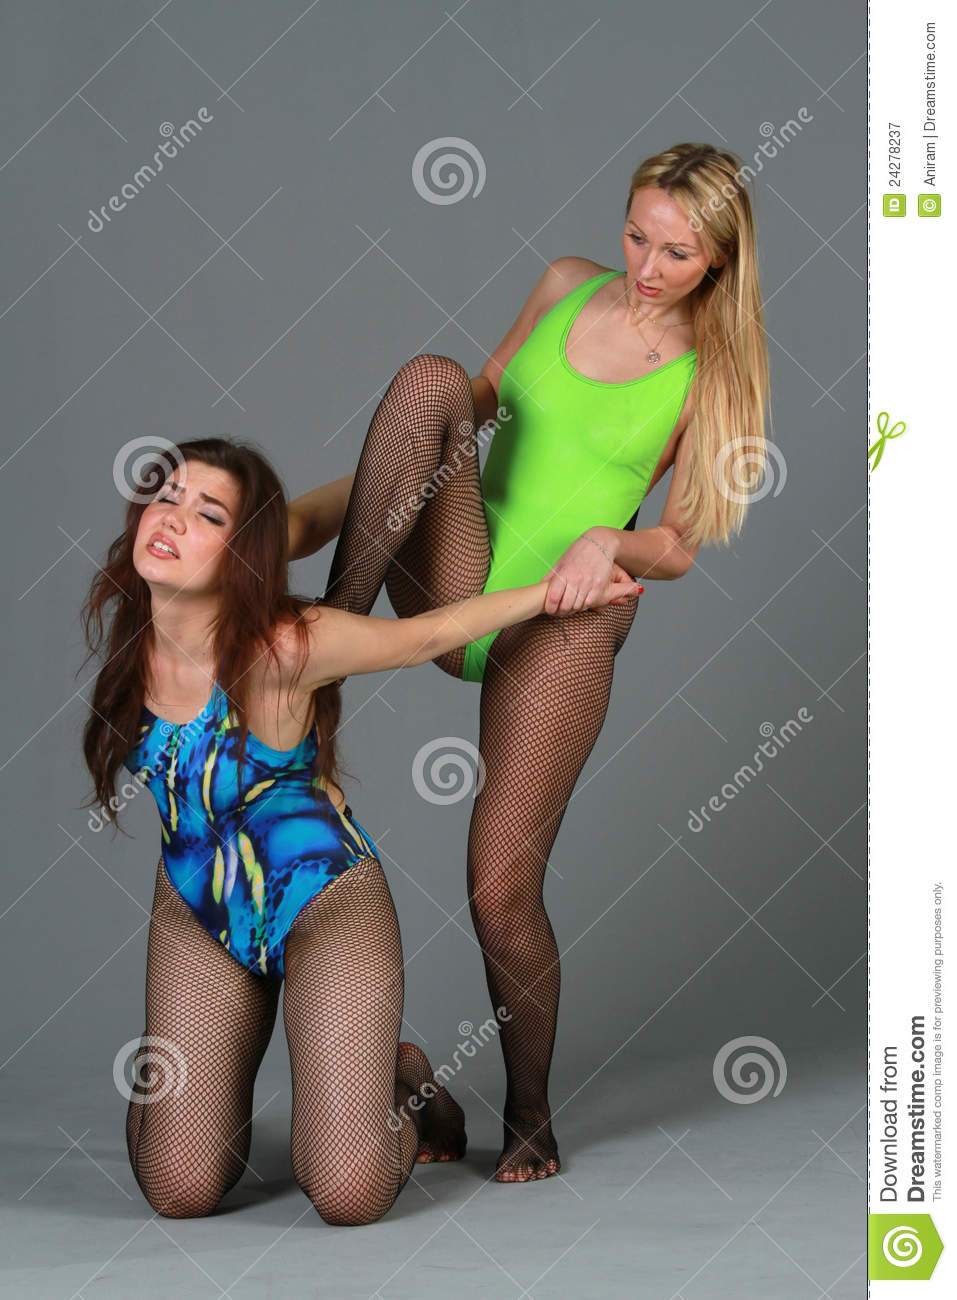 Women Fighting Royalty Free Stock Photography   Image  24278237